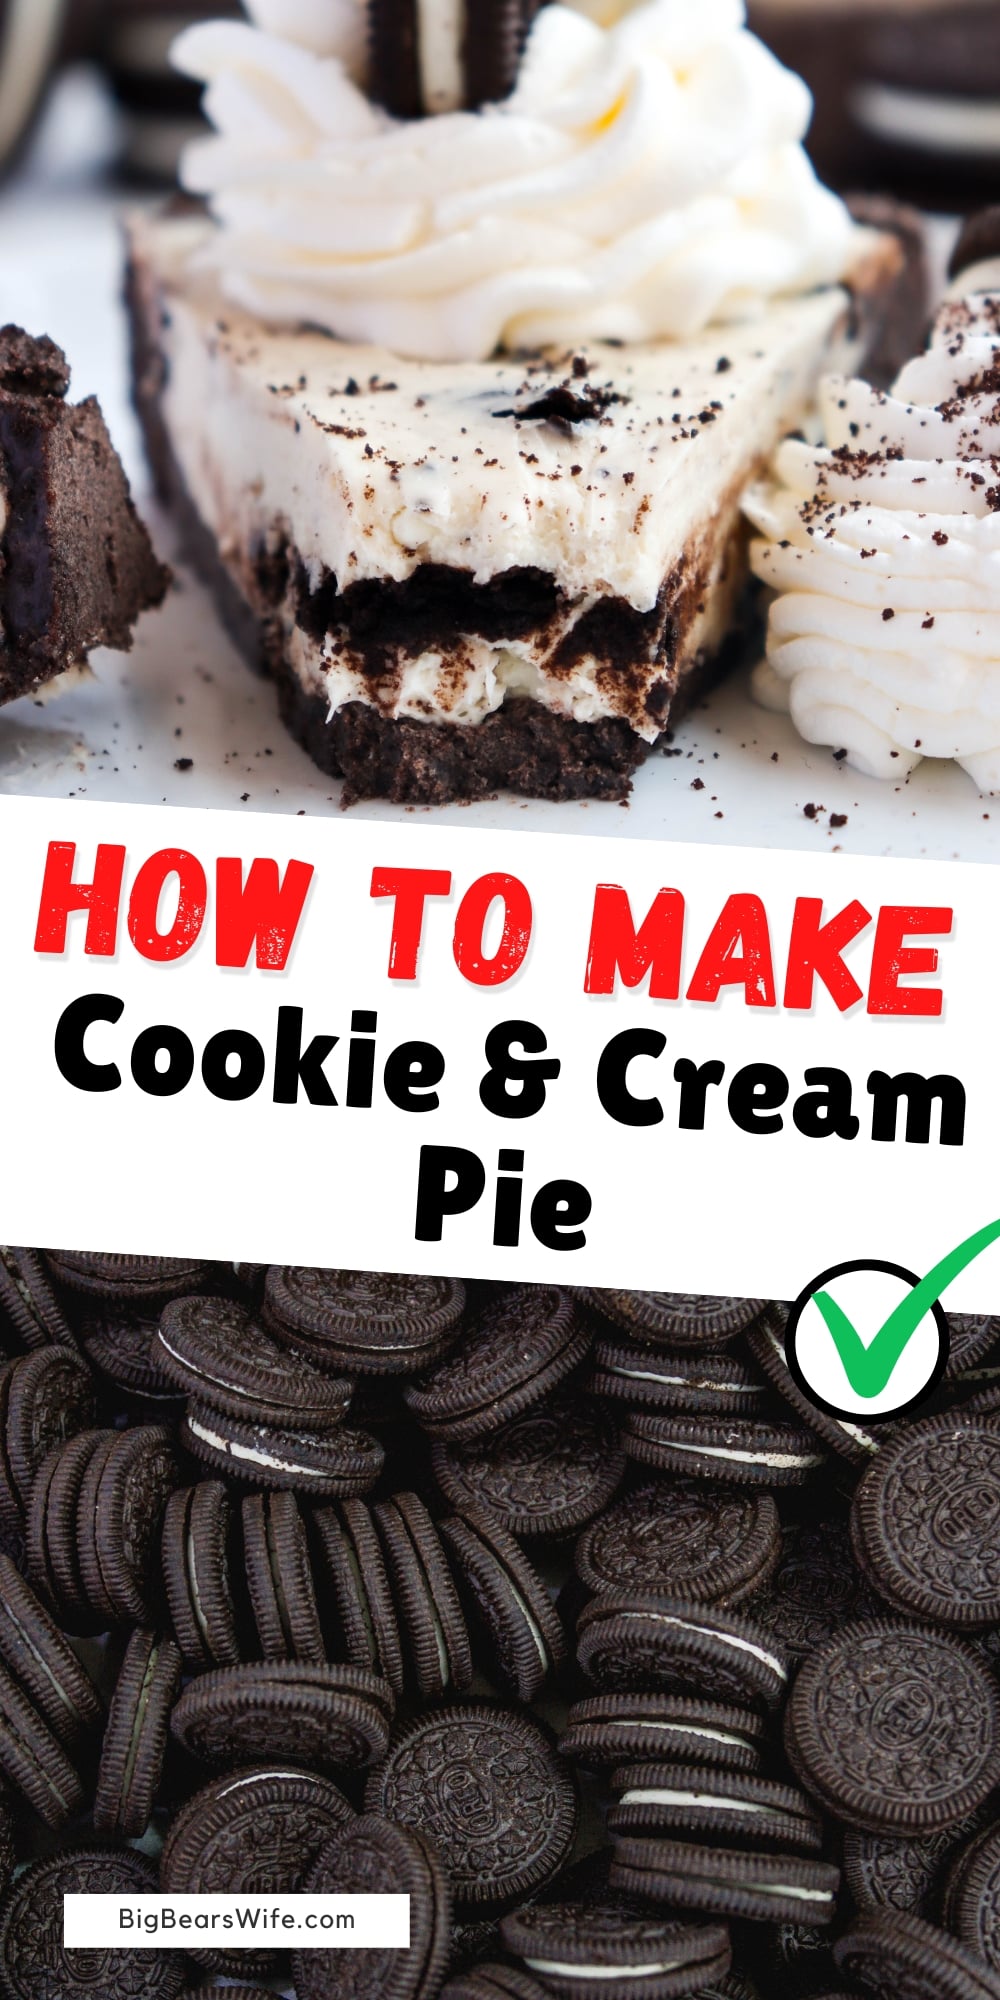 Are you looking for a dessert that is sure to impress your guests or satisfy your sweet tooth? Look no further than cookies and cream pie! This delicious dessert is perfect for any occasion, from dinner parties to solo indulgence. via @bigbearswife